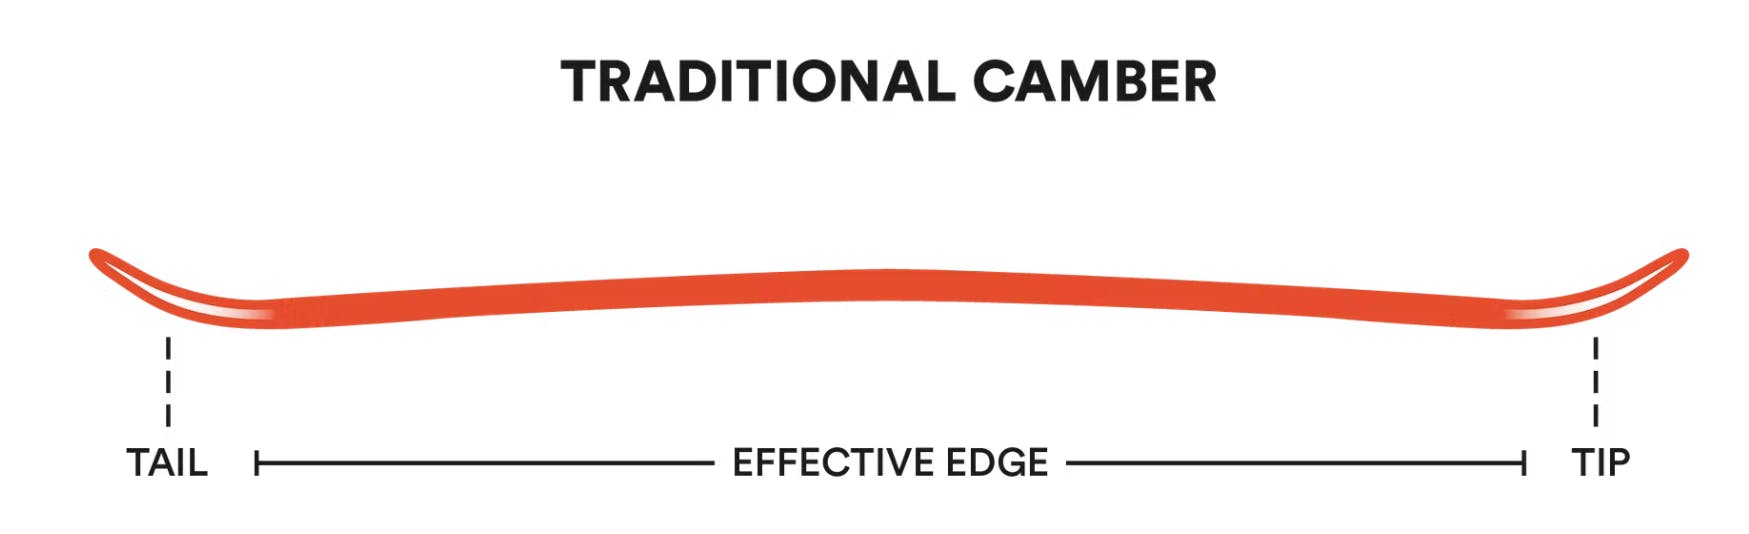 Diagram showing the shape of traditional camber in a ski. 